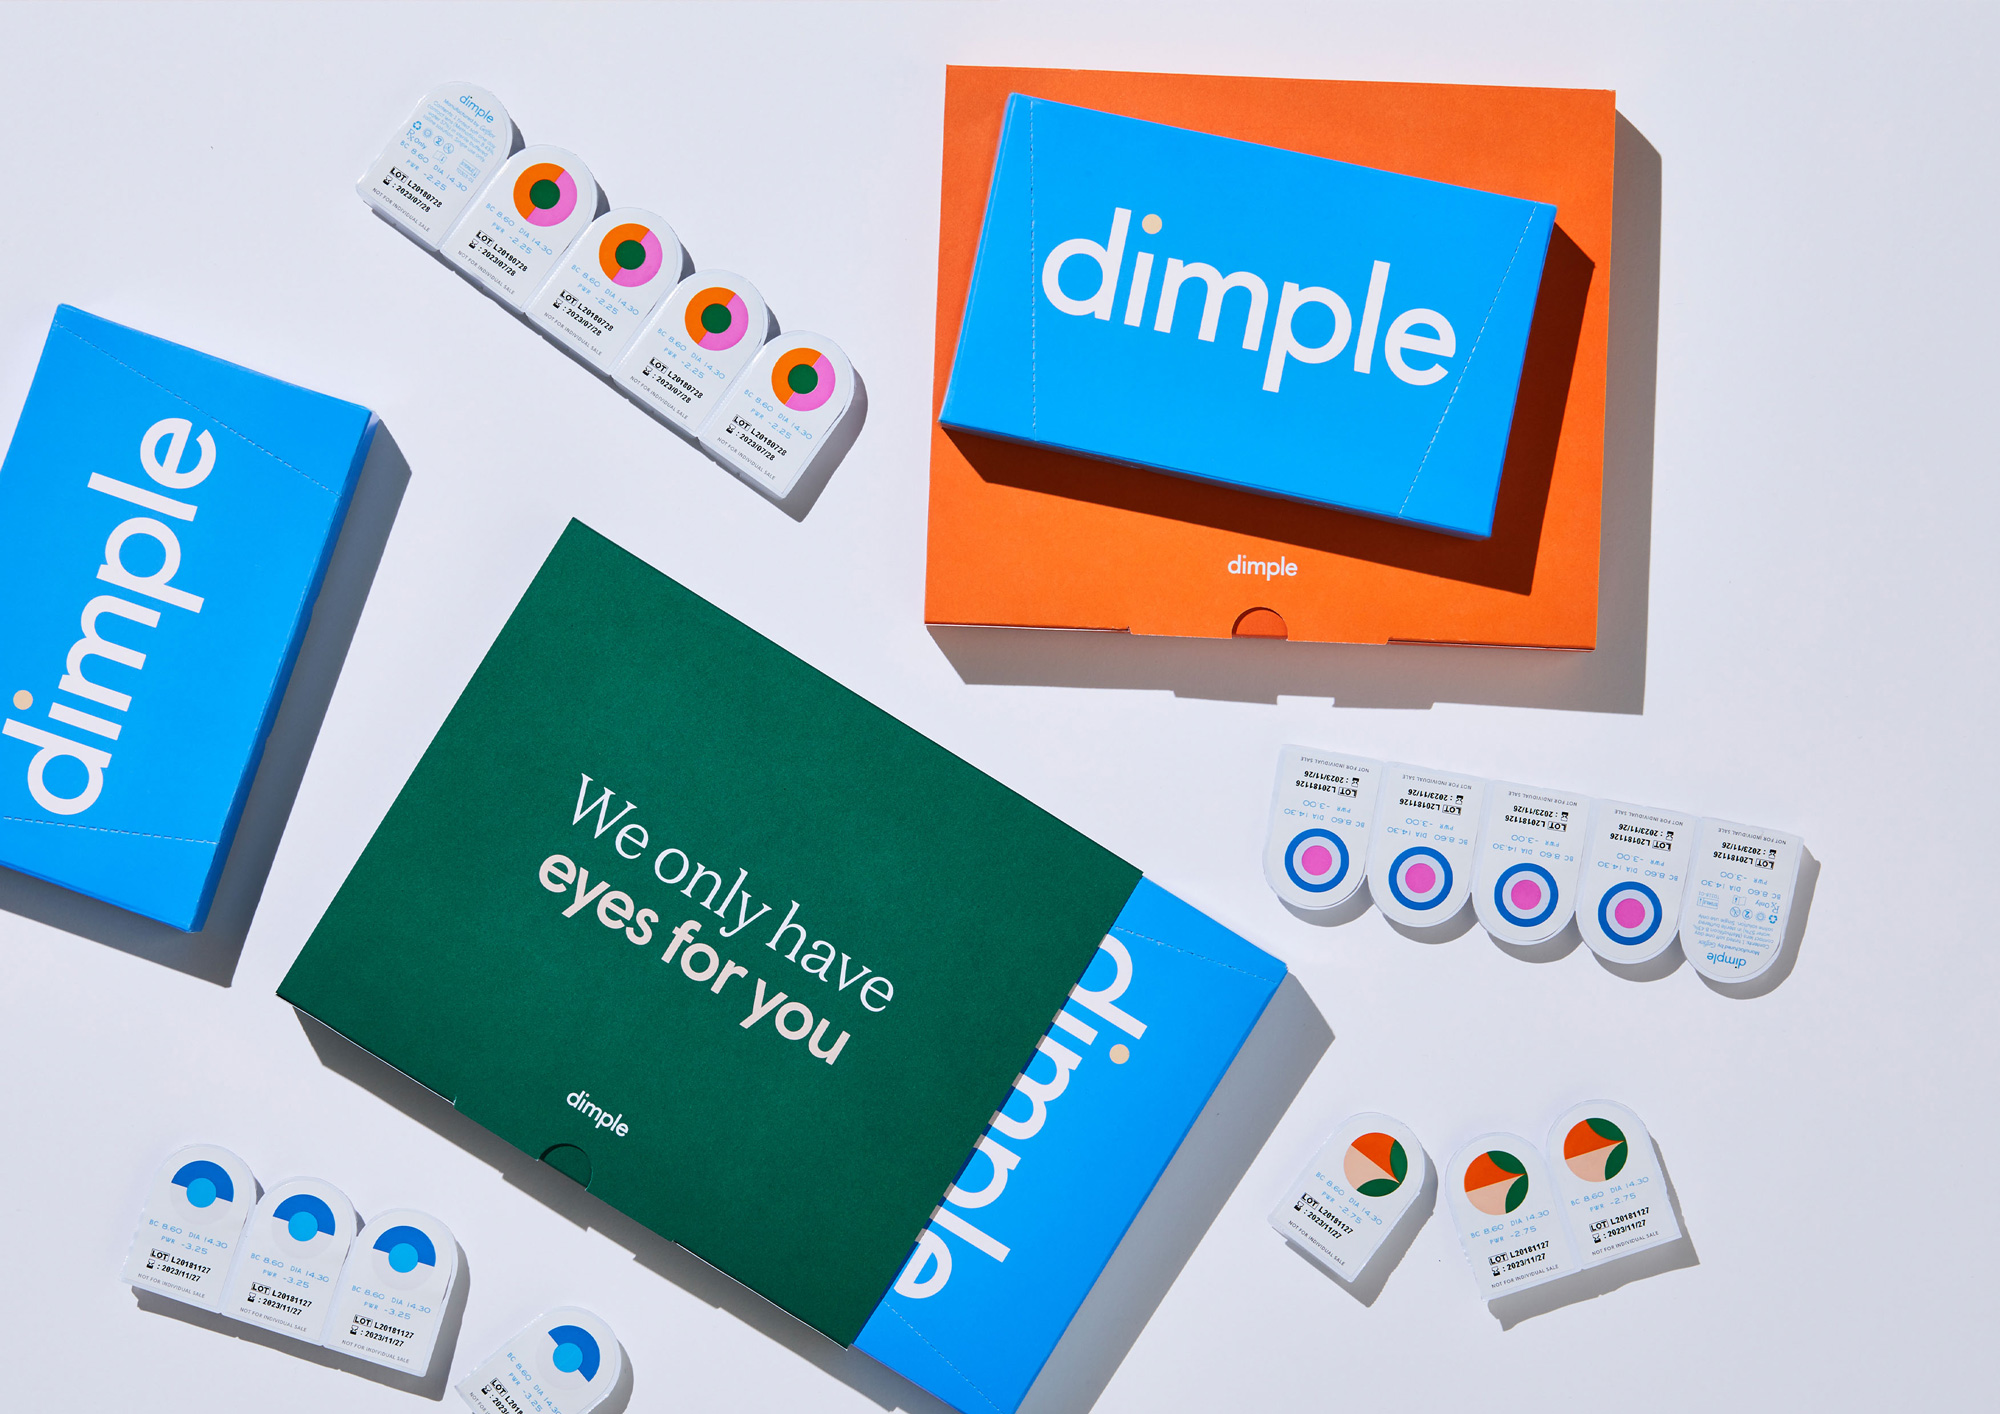 New Logo, Identity, and Packaging for Dimple by Universal Favorite